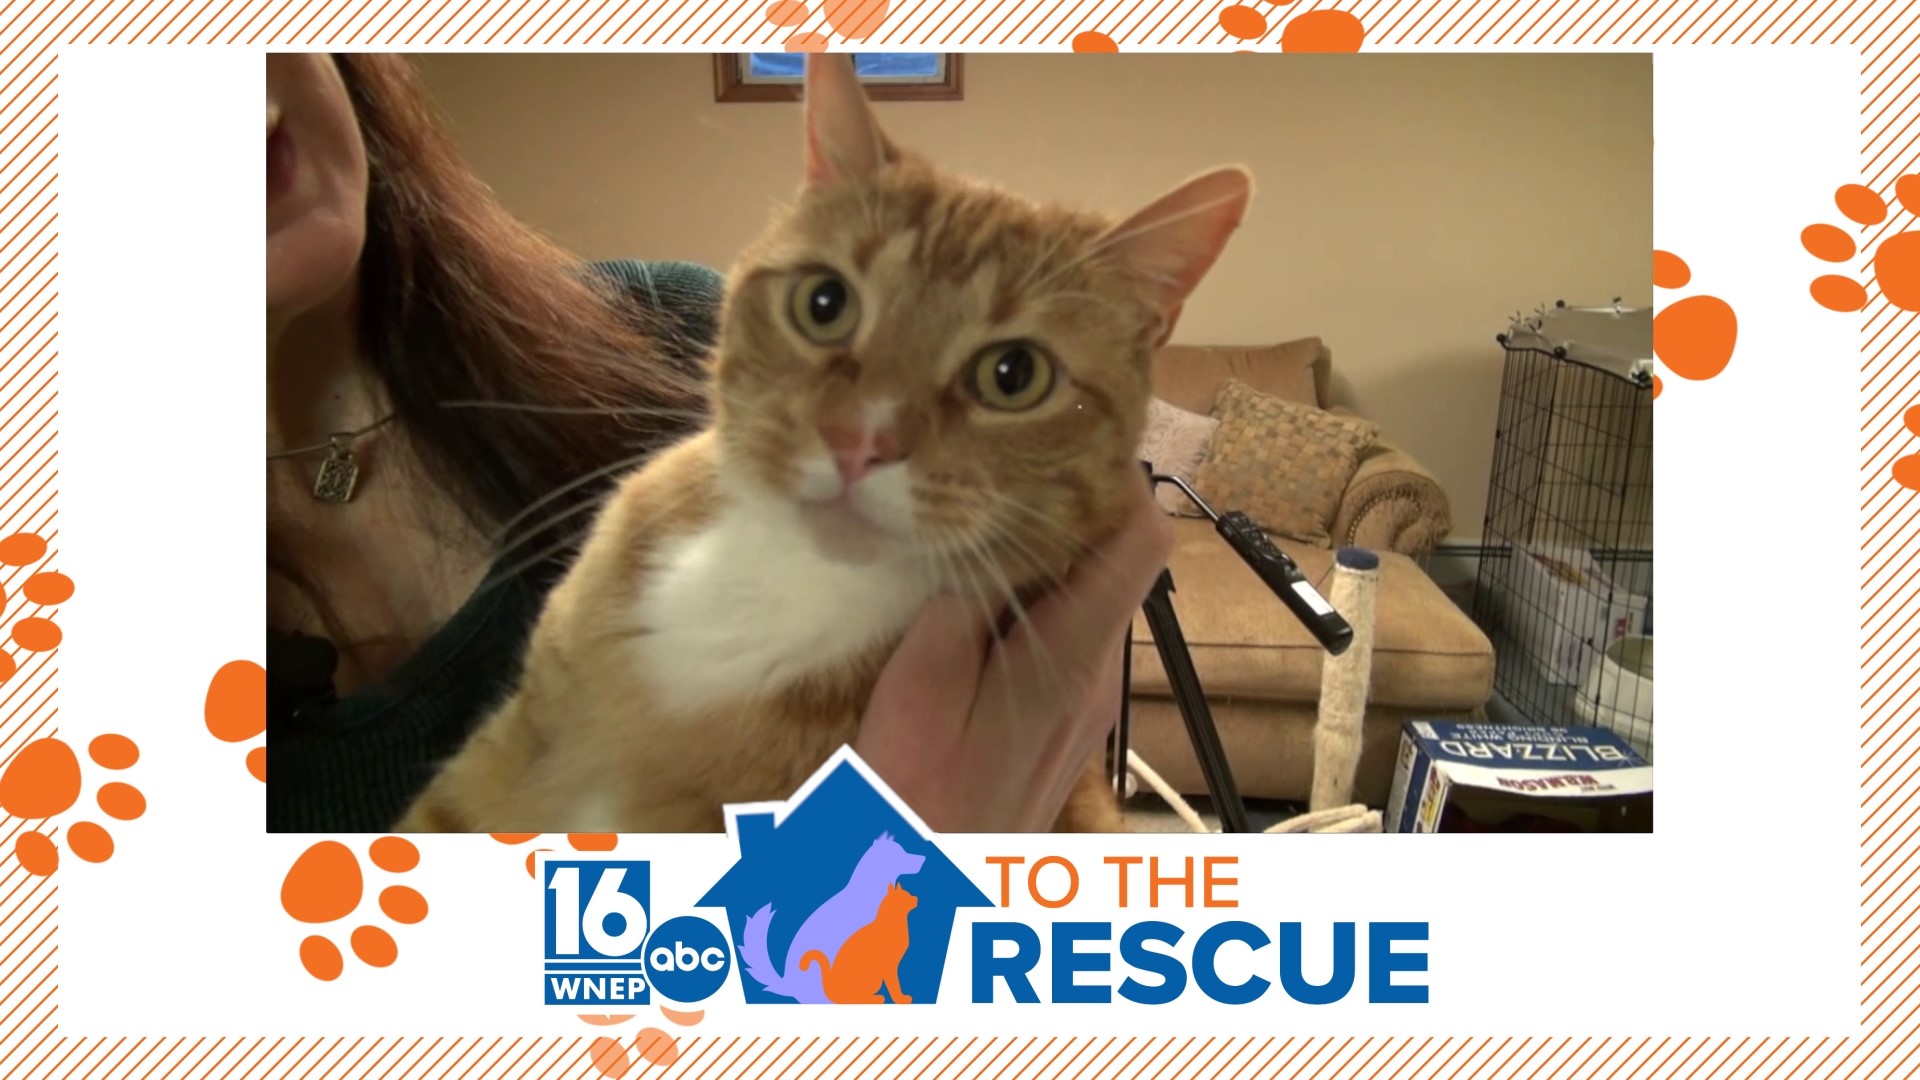 In this week's 16 to the Rescue, we meet an orange tabby cat who loves everyone and whose favorite pastime is doing nothing.